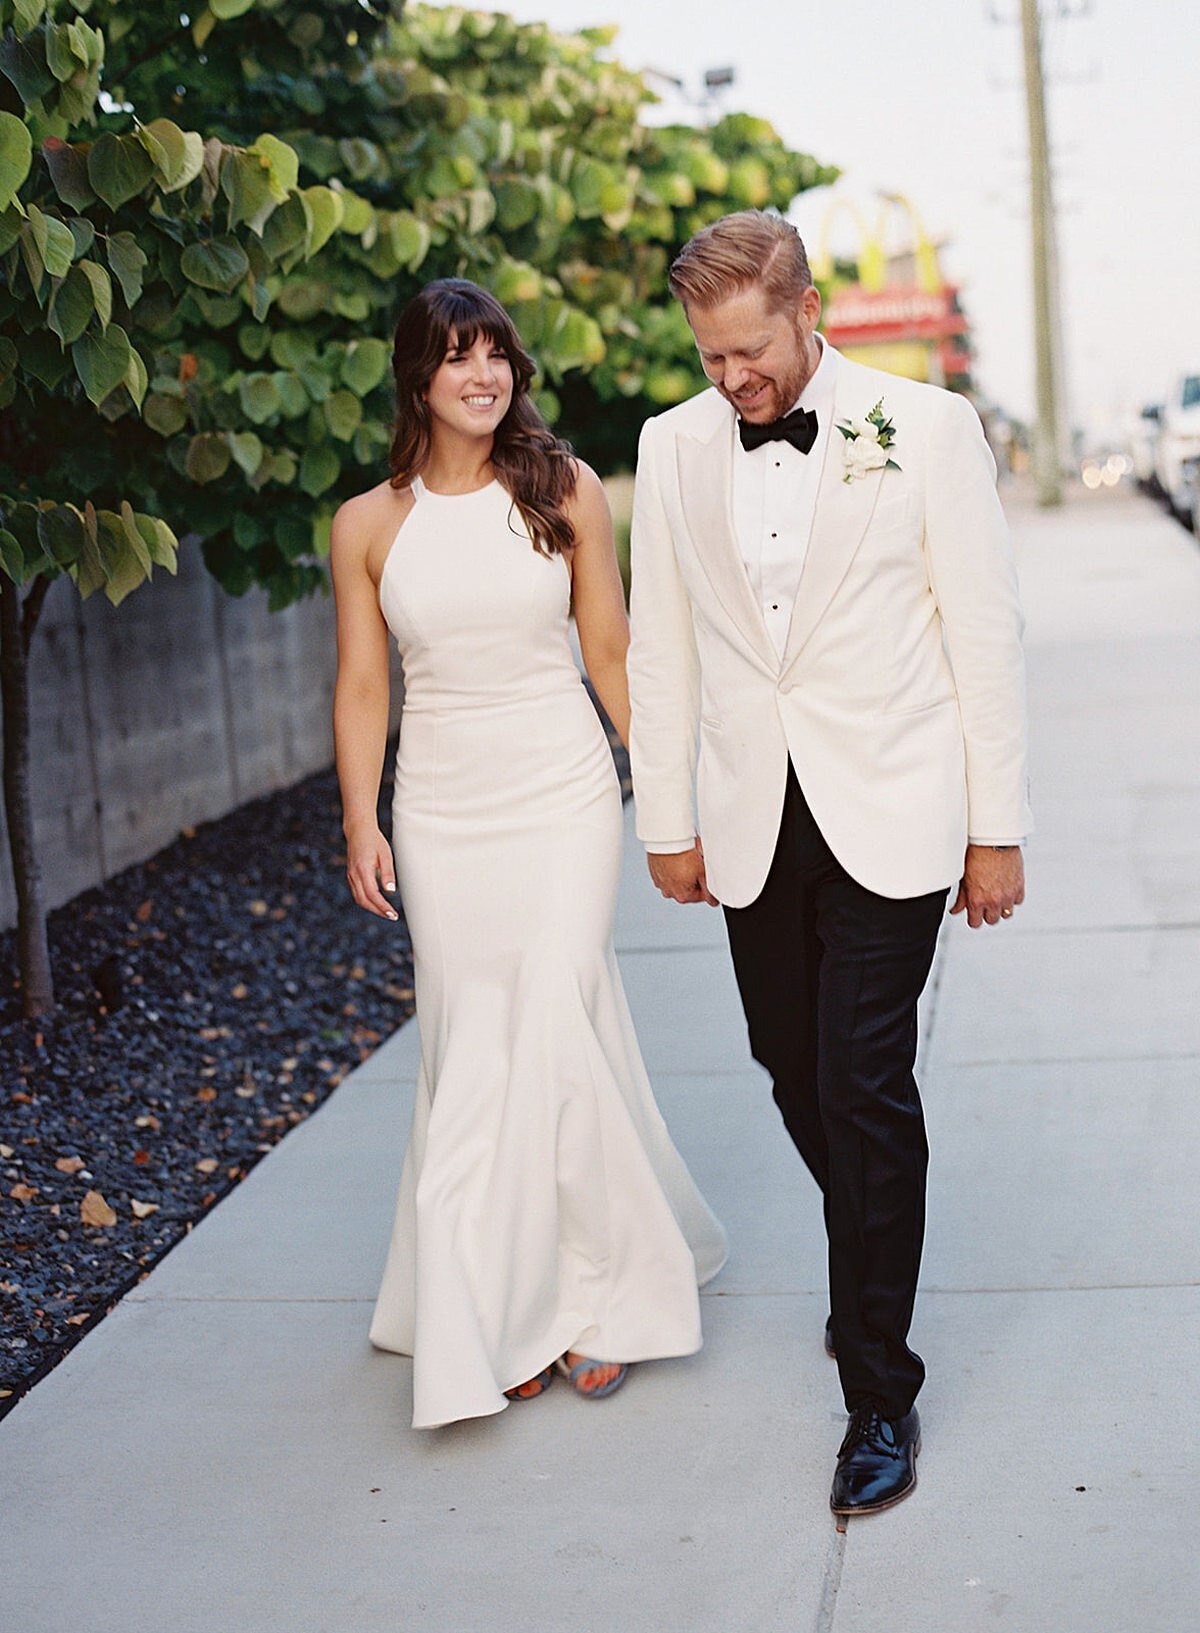 The bride, a brunette wearing a silk halter top sheath wedding dress, holds hand with the groom, who is wearing a tuxedo with a white jacket as they walk down the sidewalk in Nashville, Tennessee outside of Clementine Hall